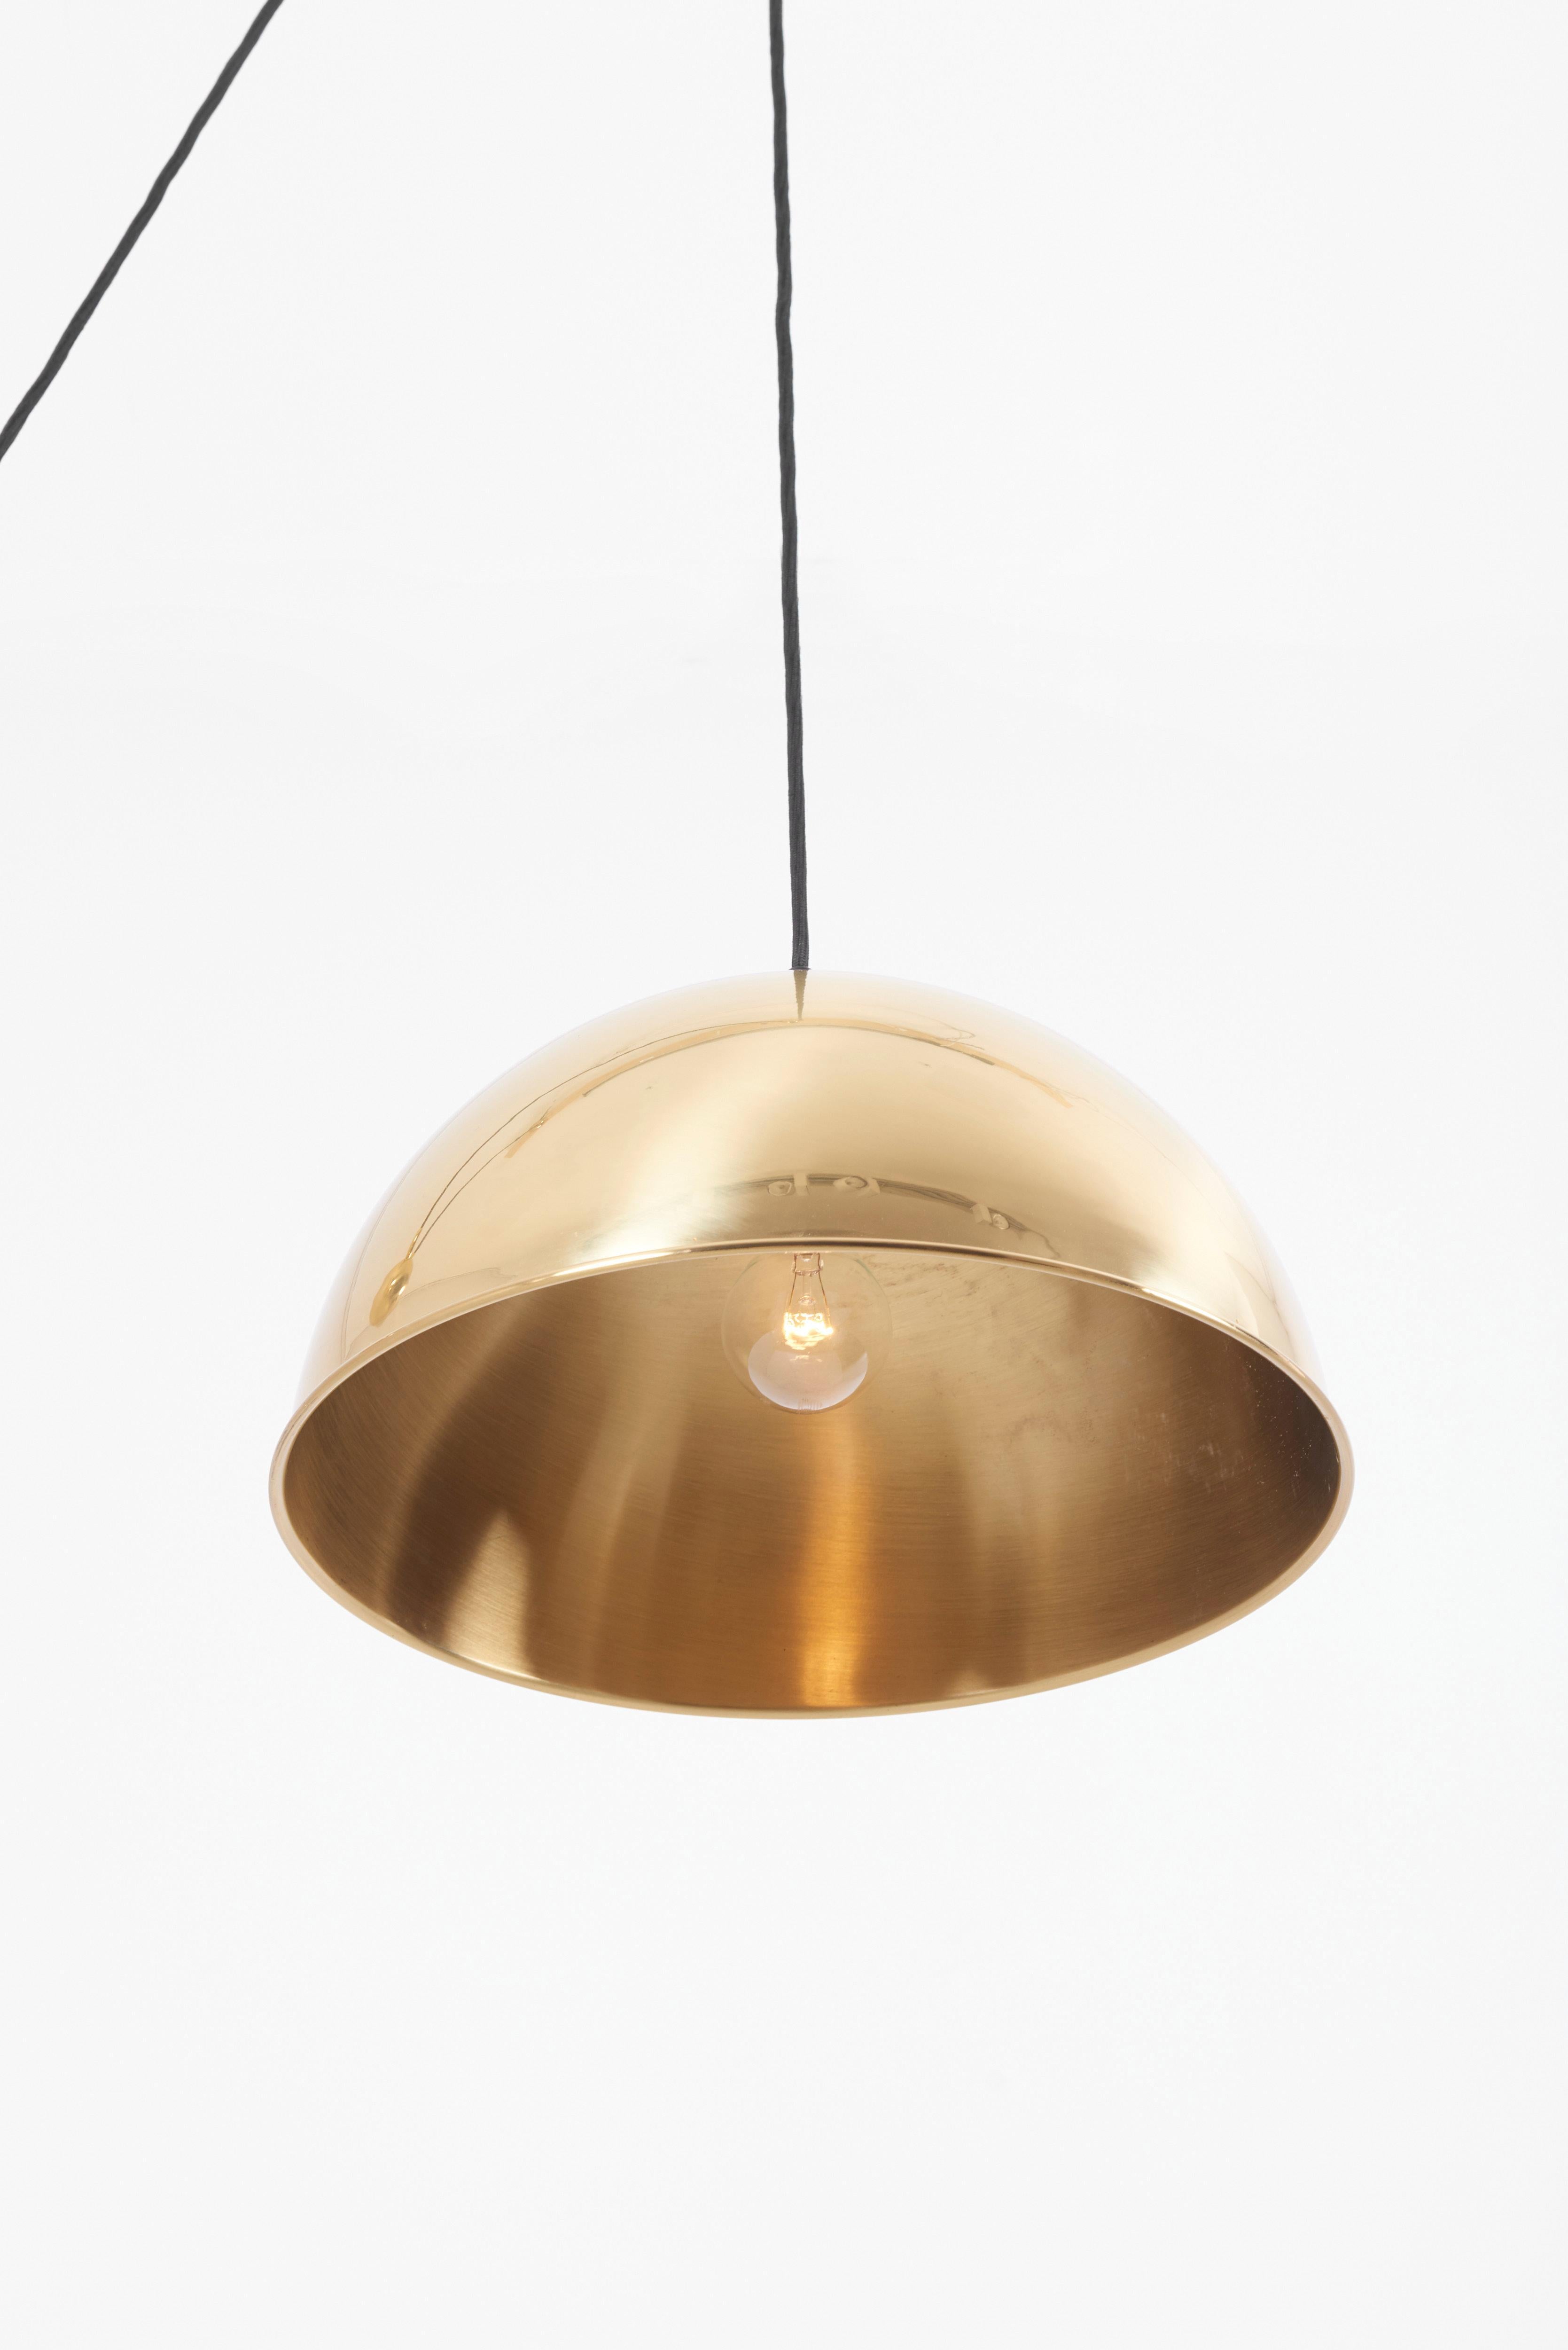 Pendant Lamp Duos with Side Pull in Brass by Florian Schulz, Germany, 1970s For Sale 3